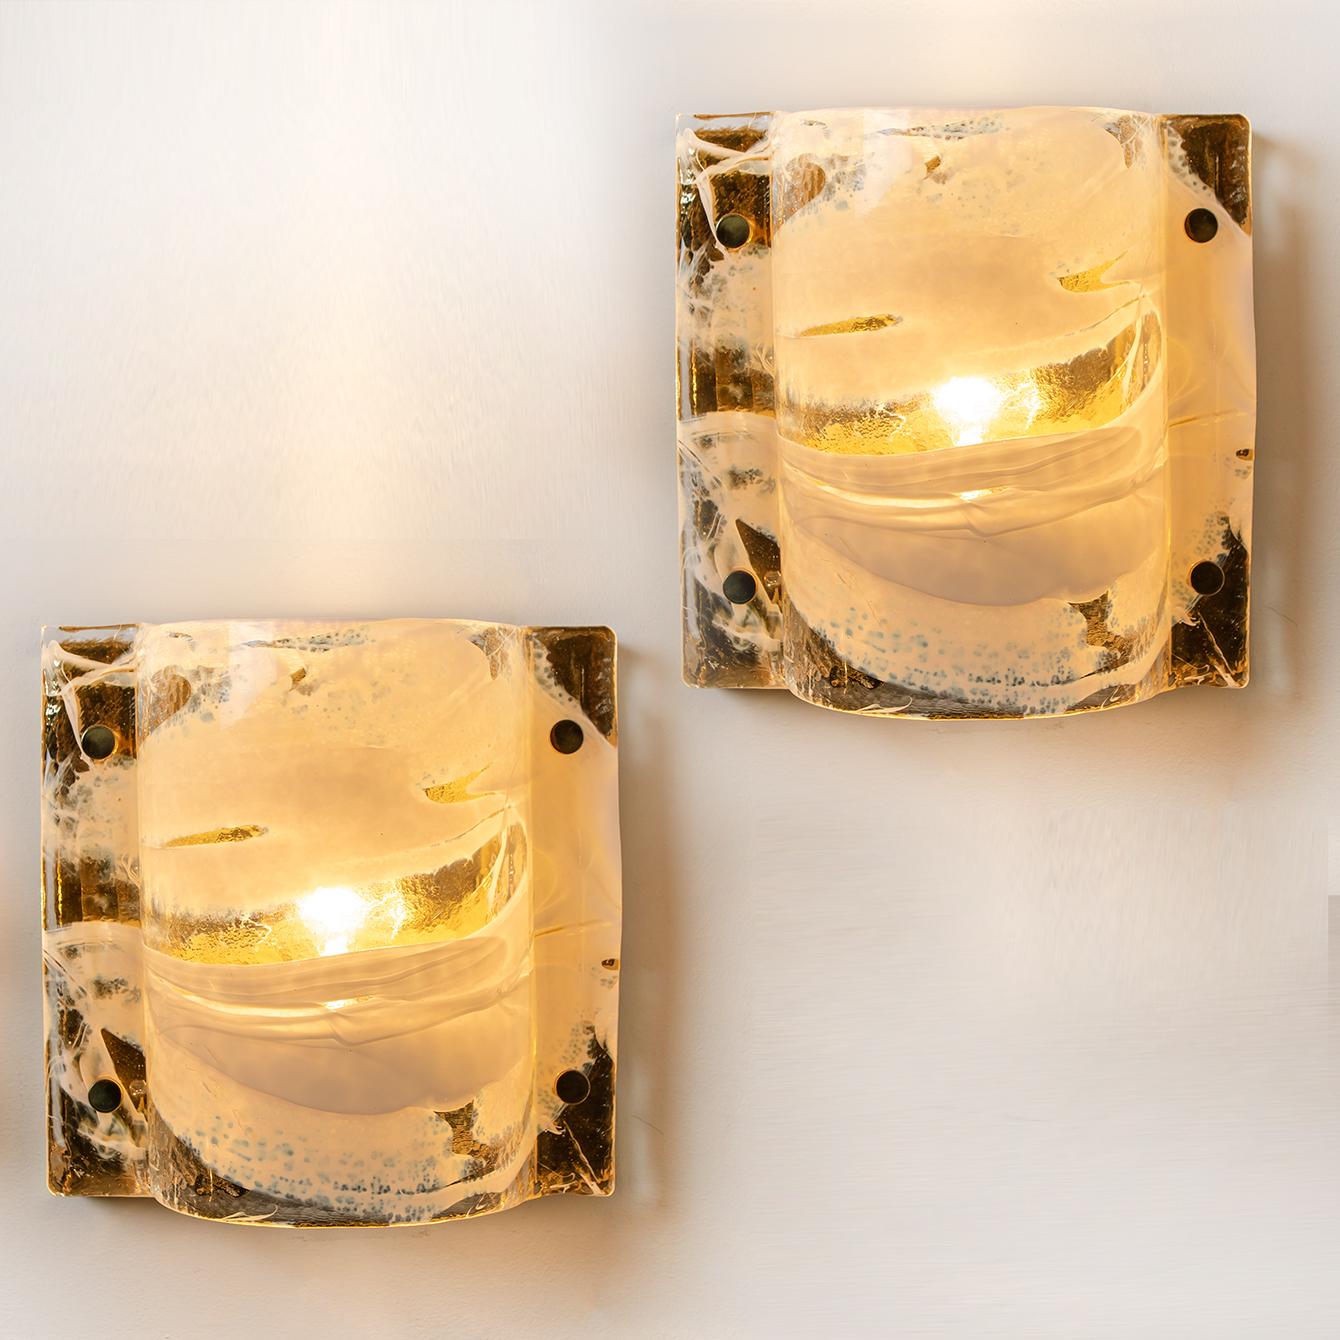 Very elegant set of J.T. Kalmar sconces featuring thick white and clear swirl glass on a gilded brass base. Minimalistic design executed with a taste for excellence in craftsmanship. Illuminates beautifully.

The two large flushmounts (can also